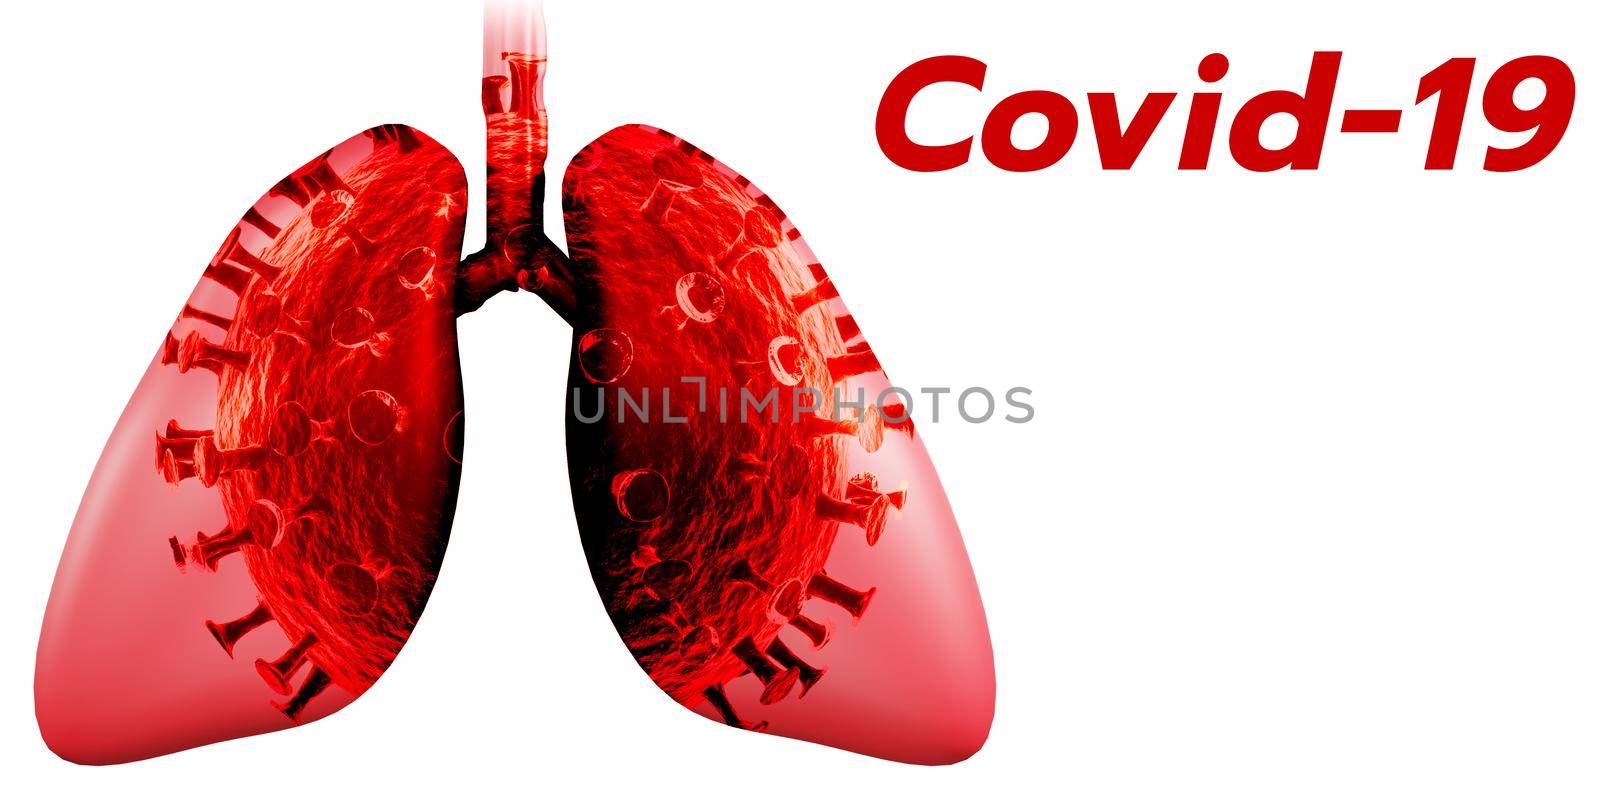 Red text COVID-19 with virus in lung graphic on white background, name for Coronavirus disease. 3D